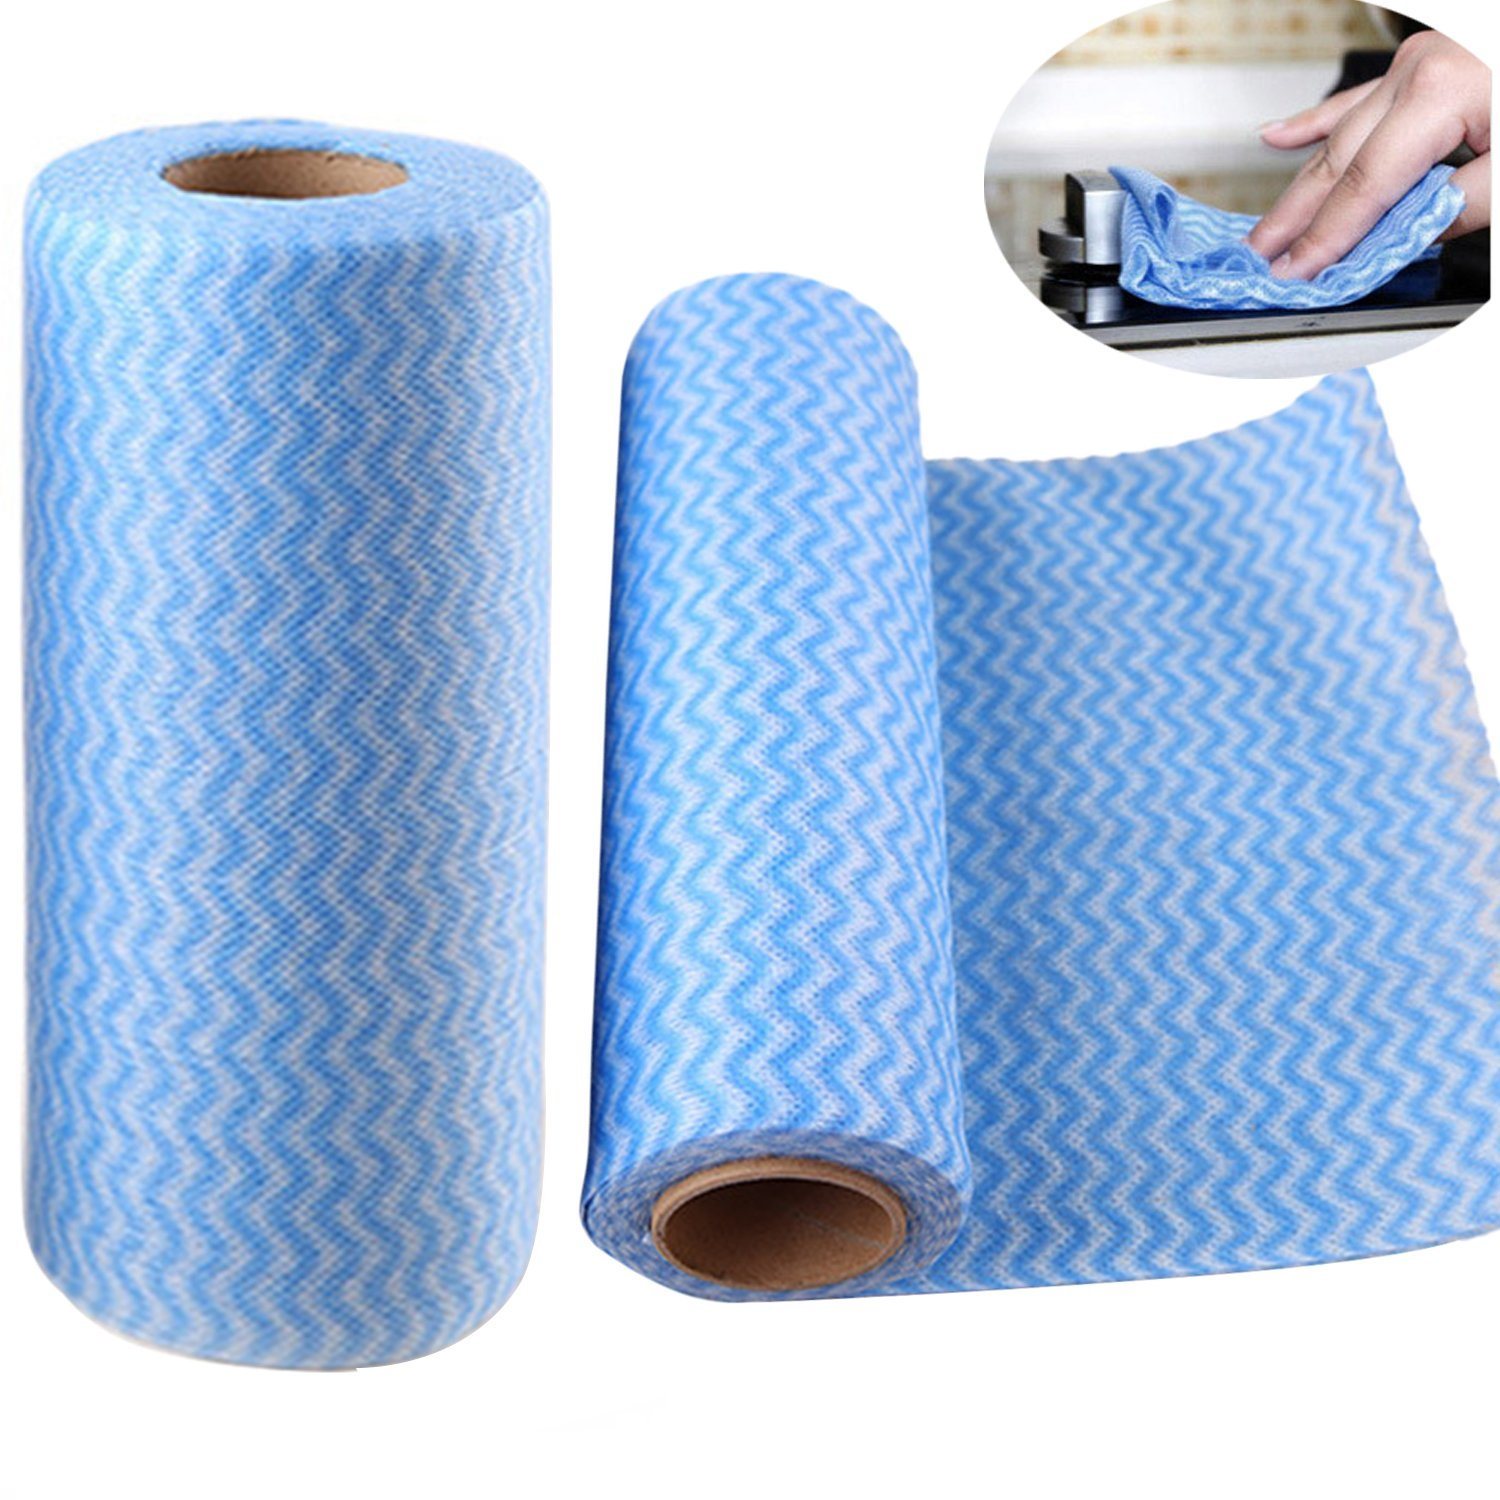 Tear off Nonwoven Microfiber Cleaning Cloth Kitchen